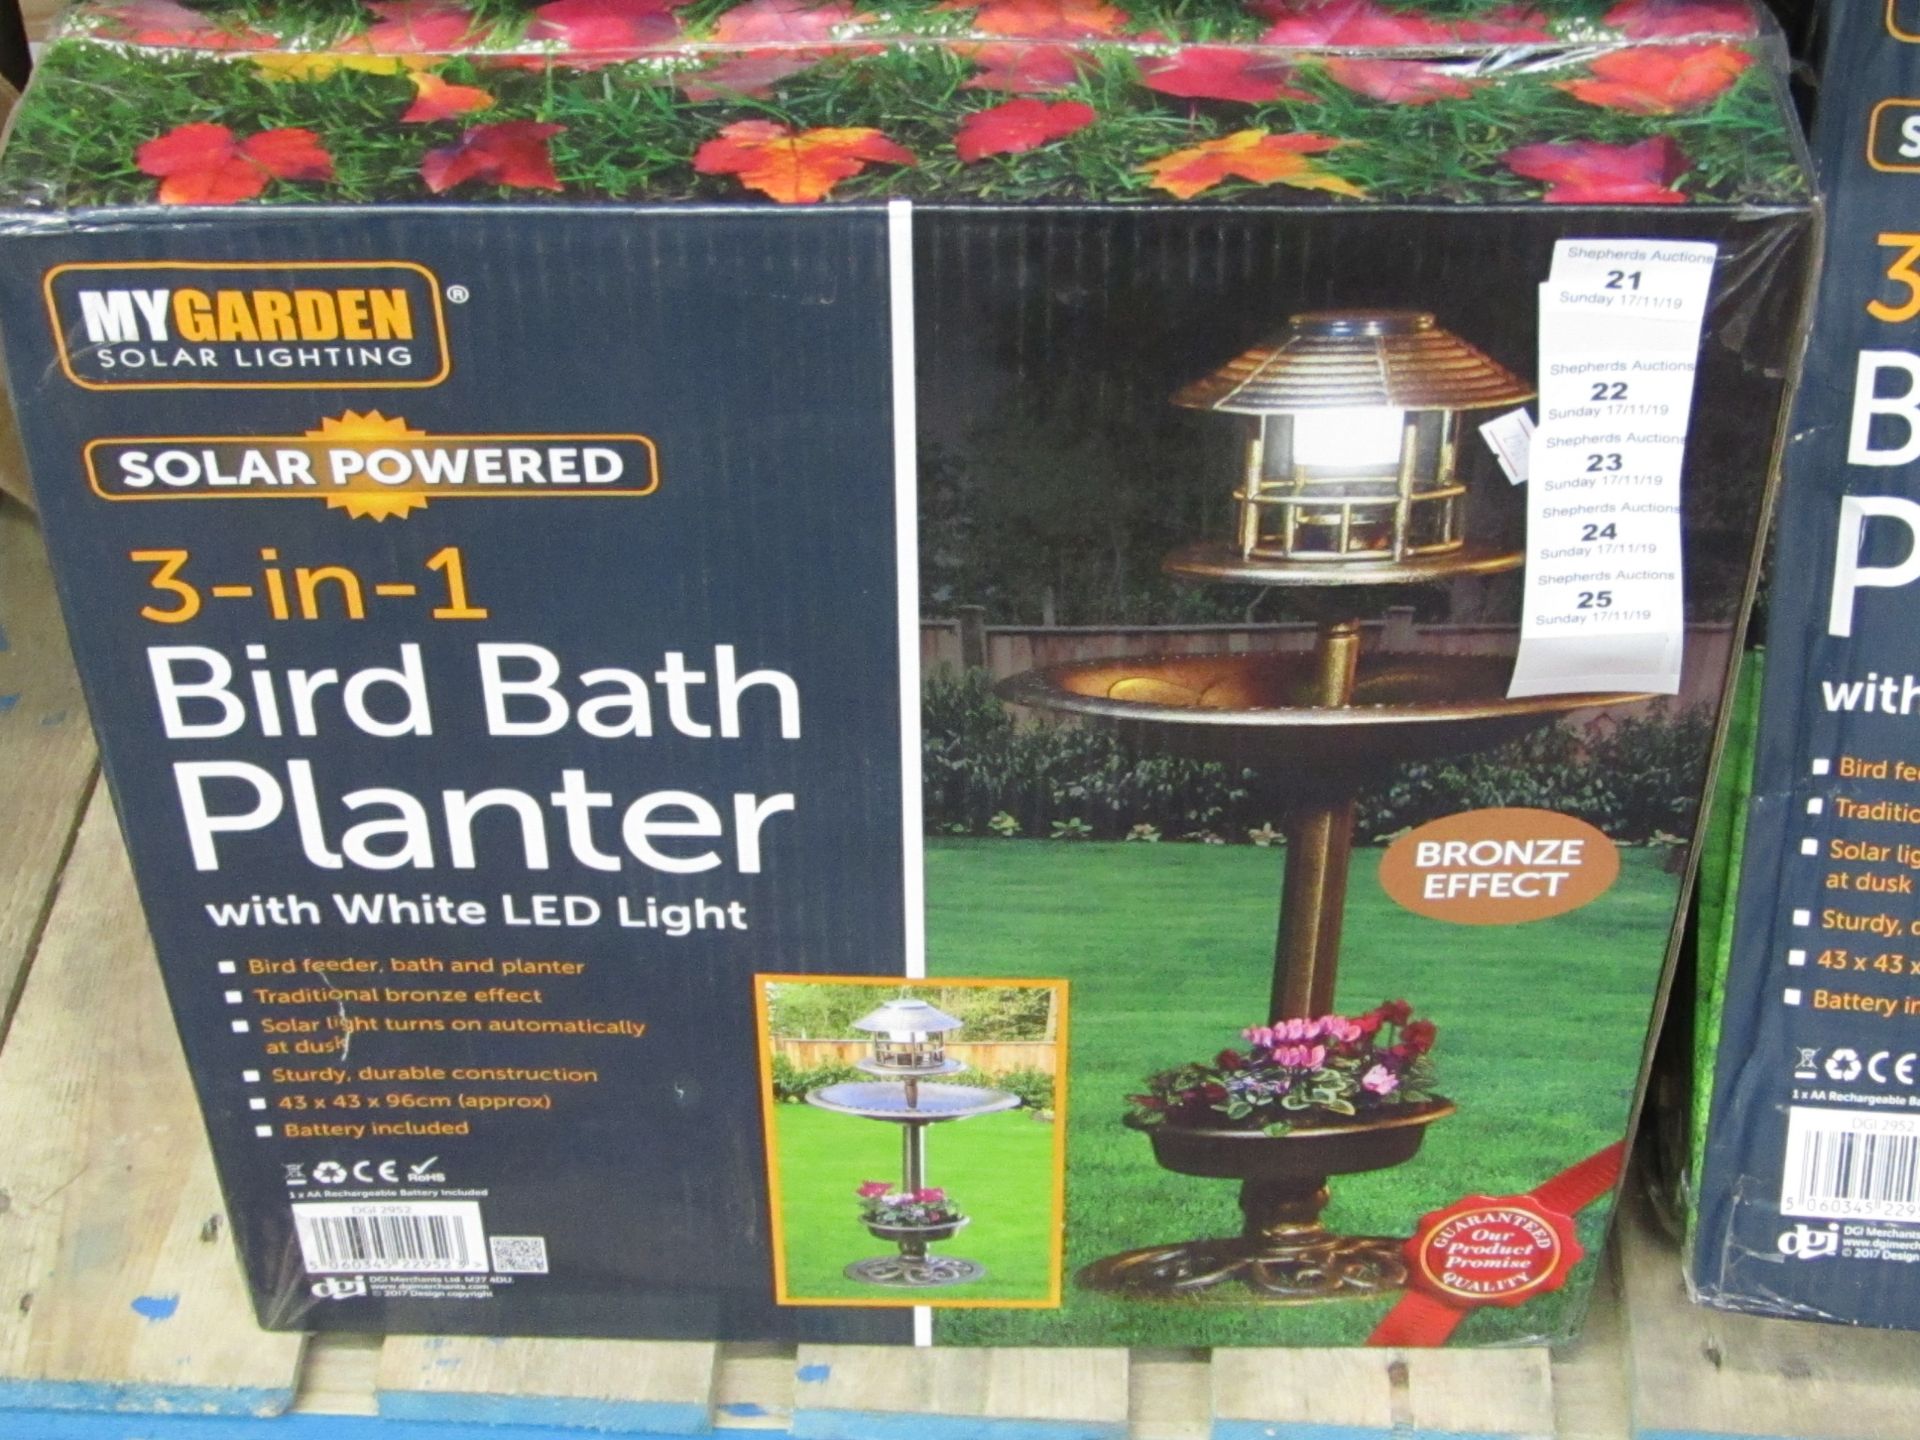 My Garden Solar Powered 3 in 1 Bird Bath Planter with White LED Light. Boxed but unchecked